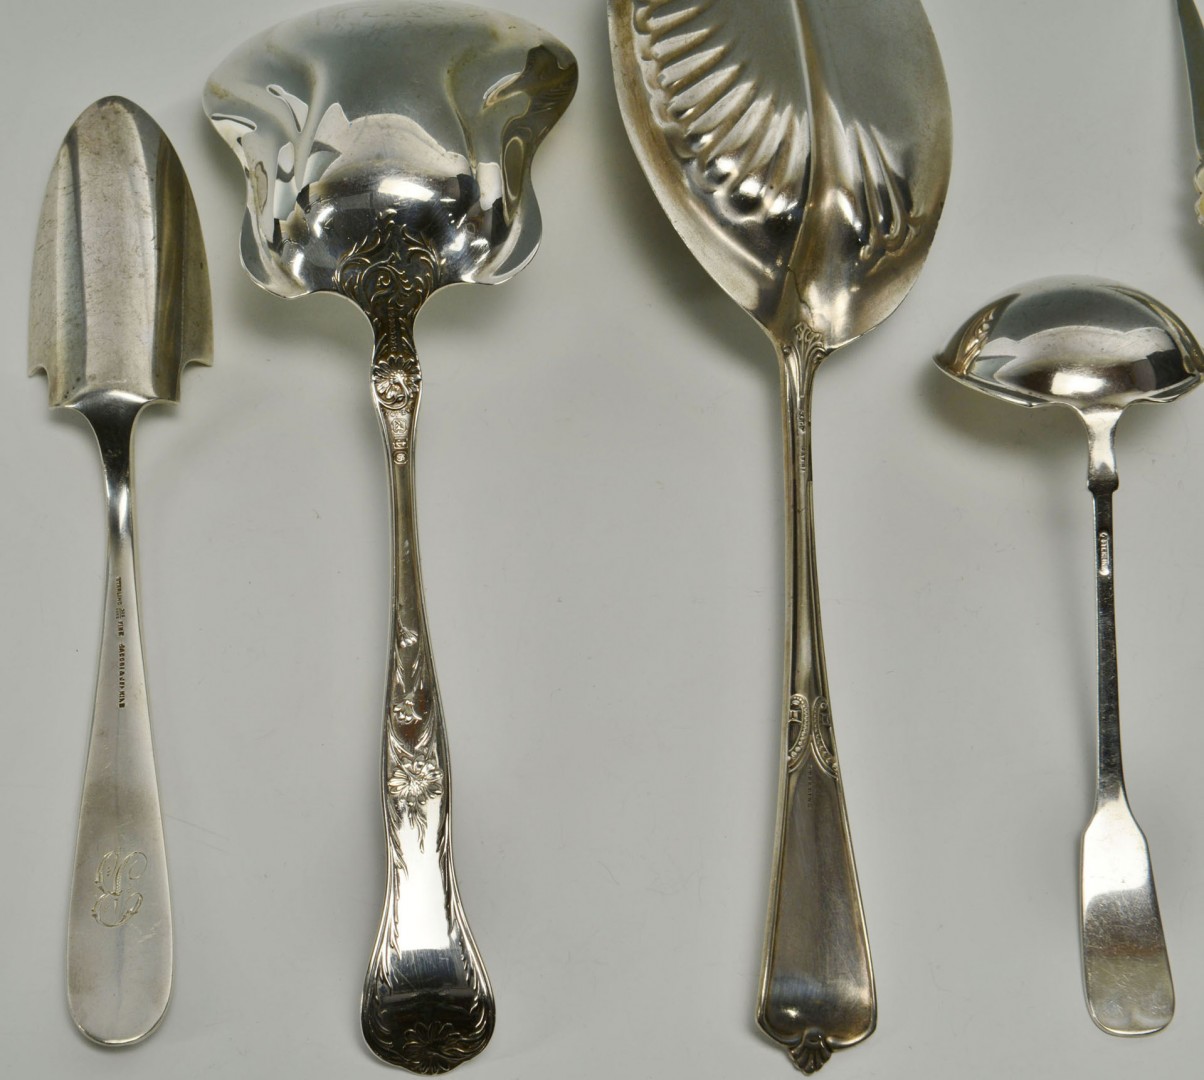 Lot 726: 8 American Sterling serving pieces, early patterns